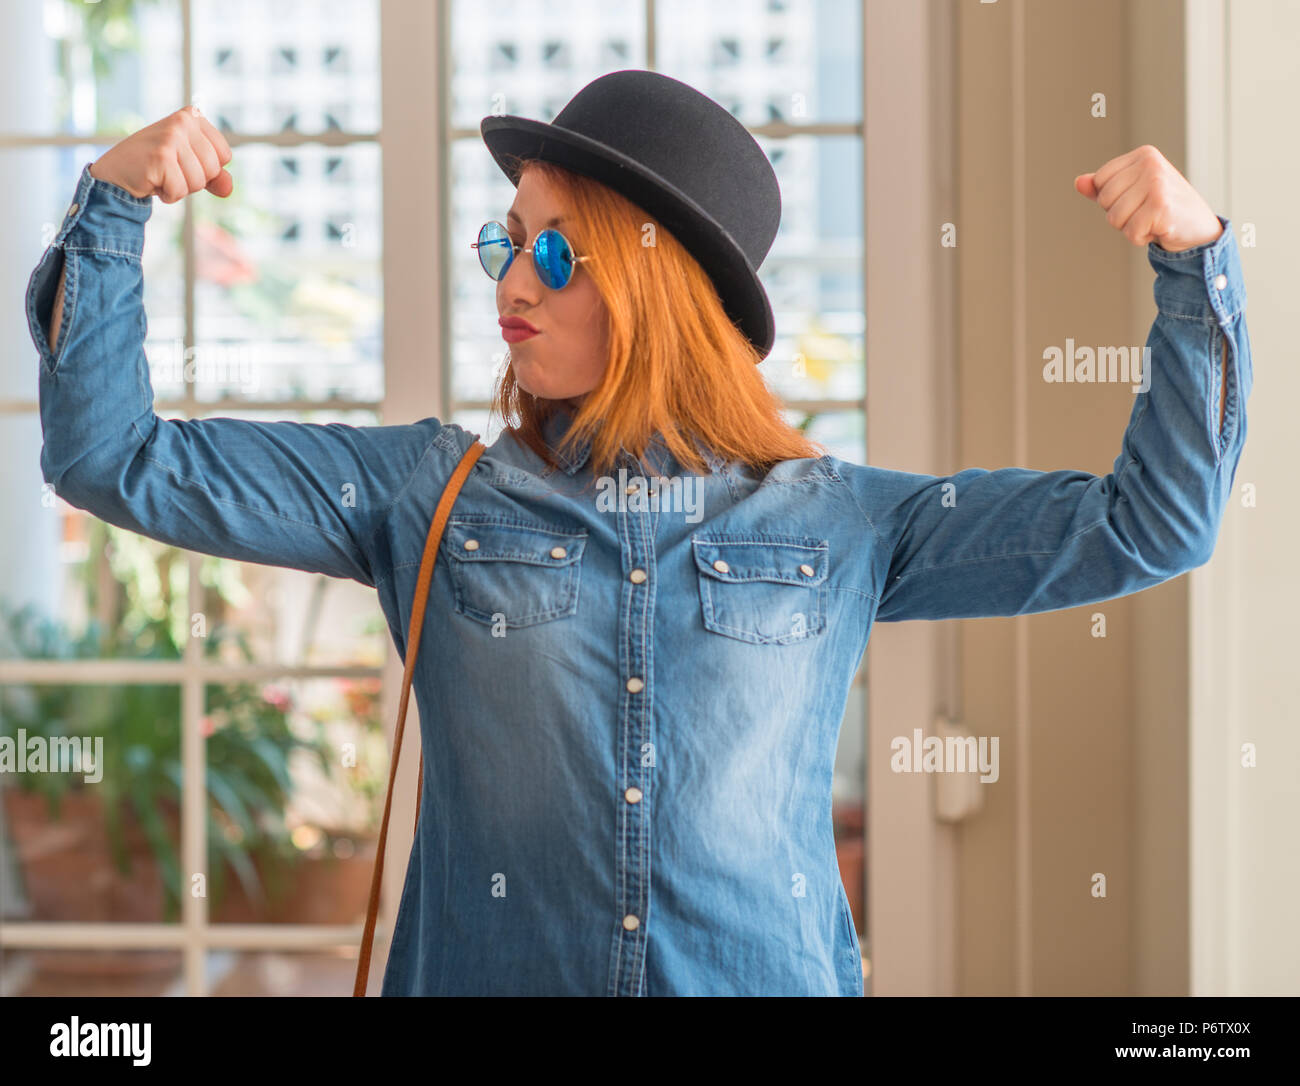 Stylish redhead woman wearing bowler hat and sunglasses showing arms muscles smiling proud. Fitness concept. Stock Photo